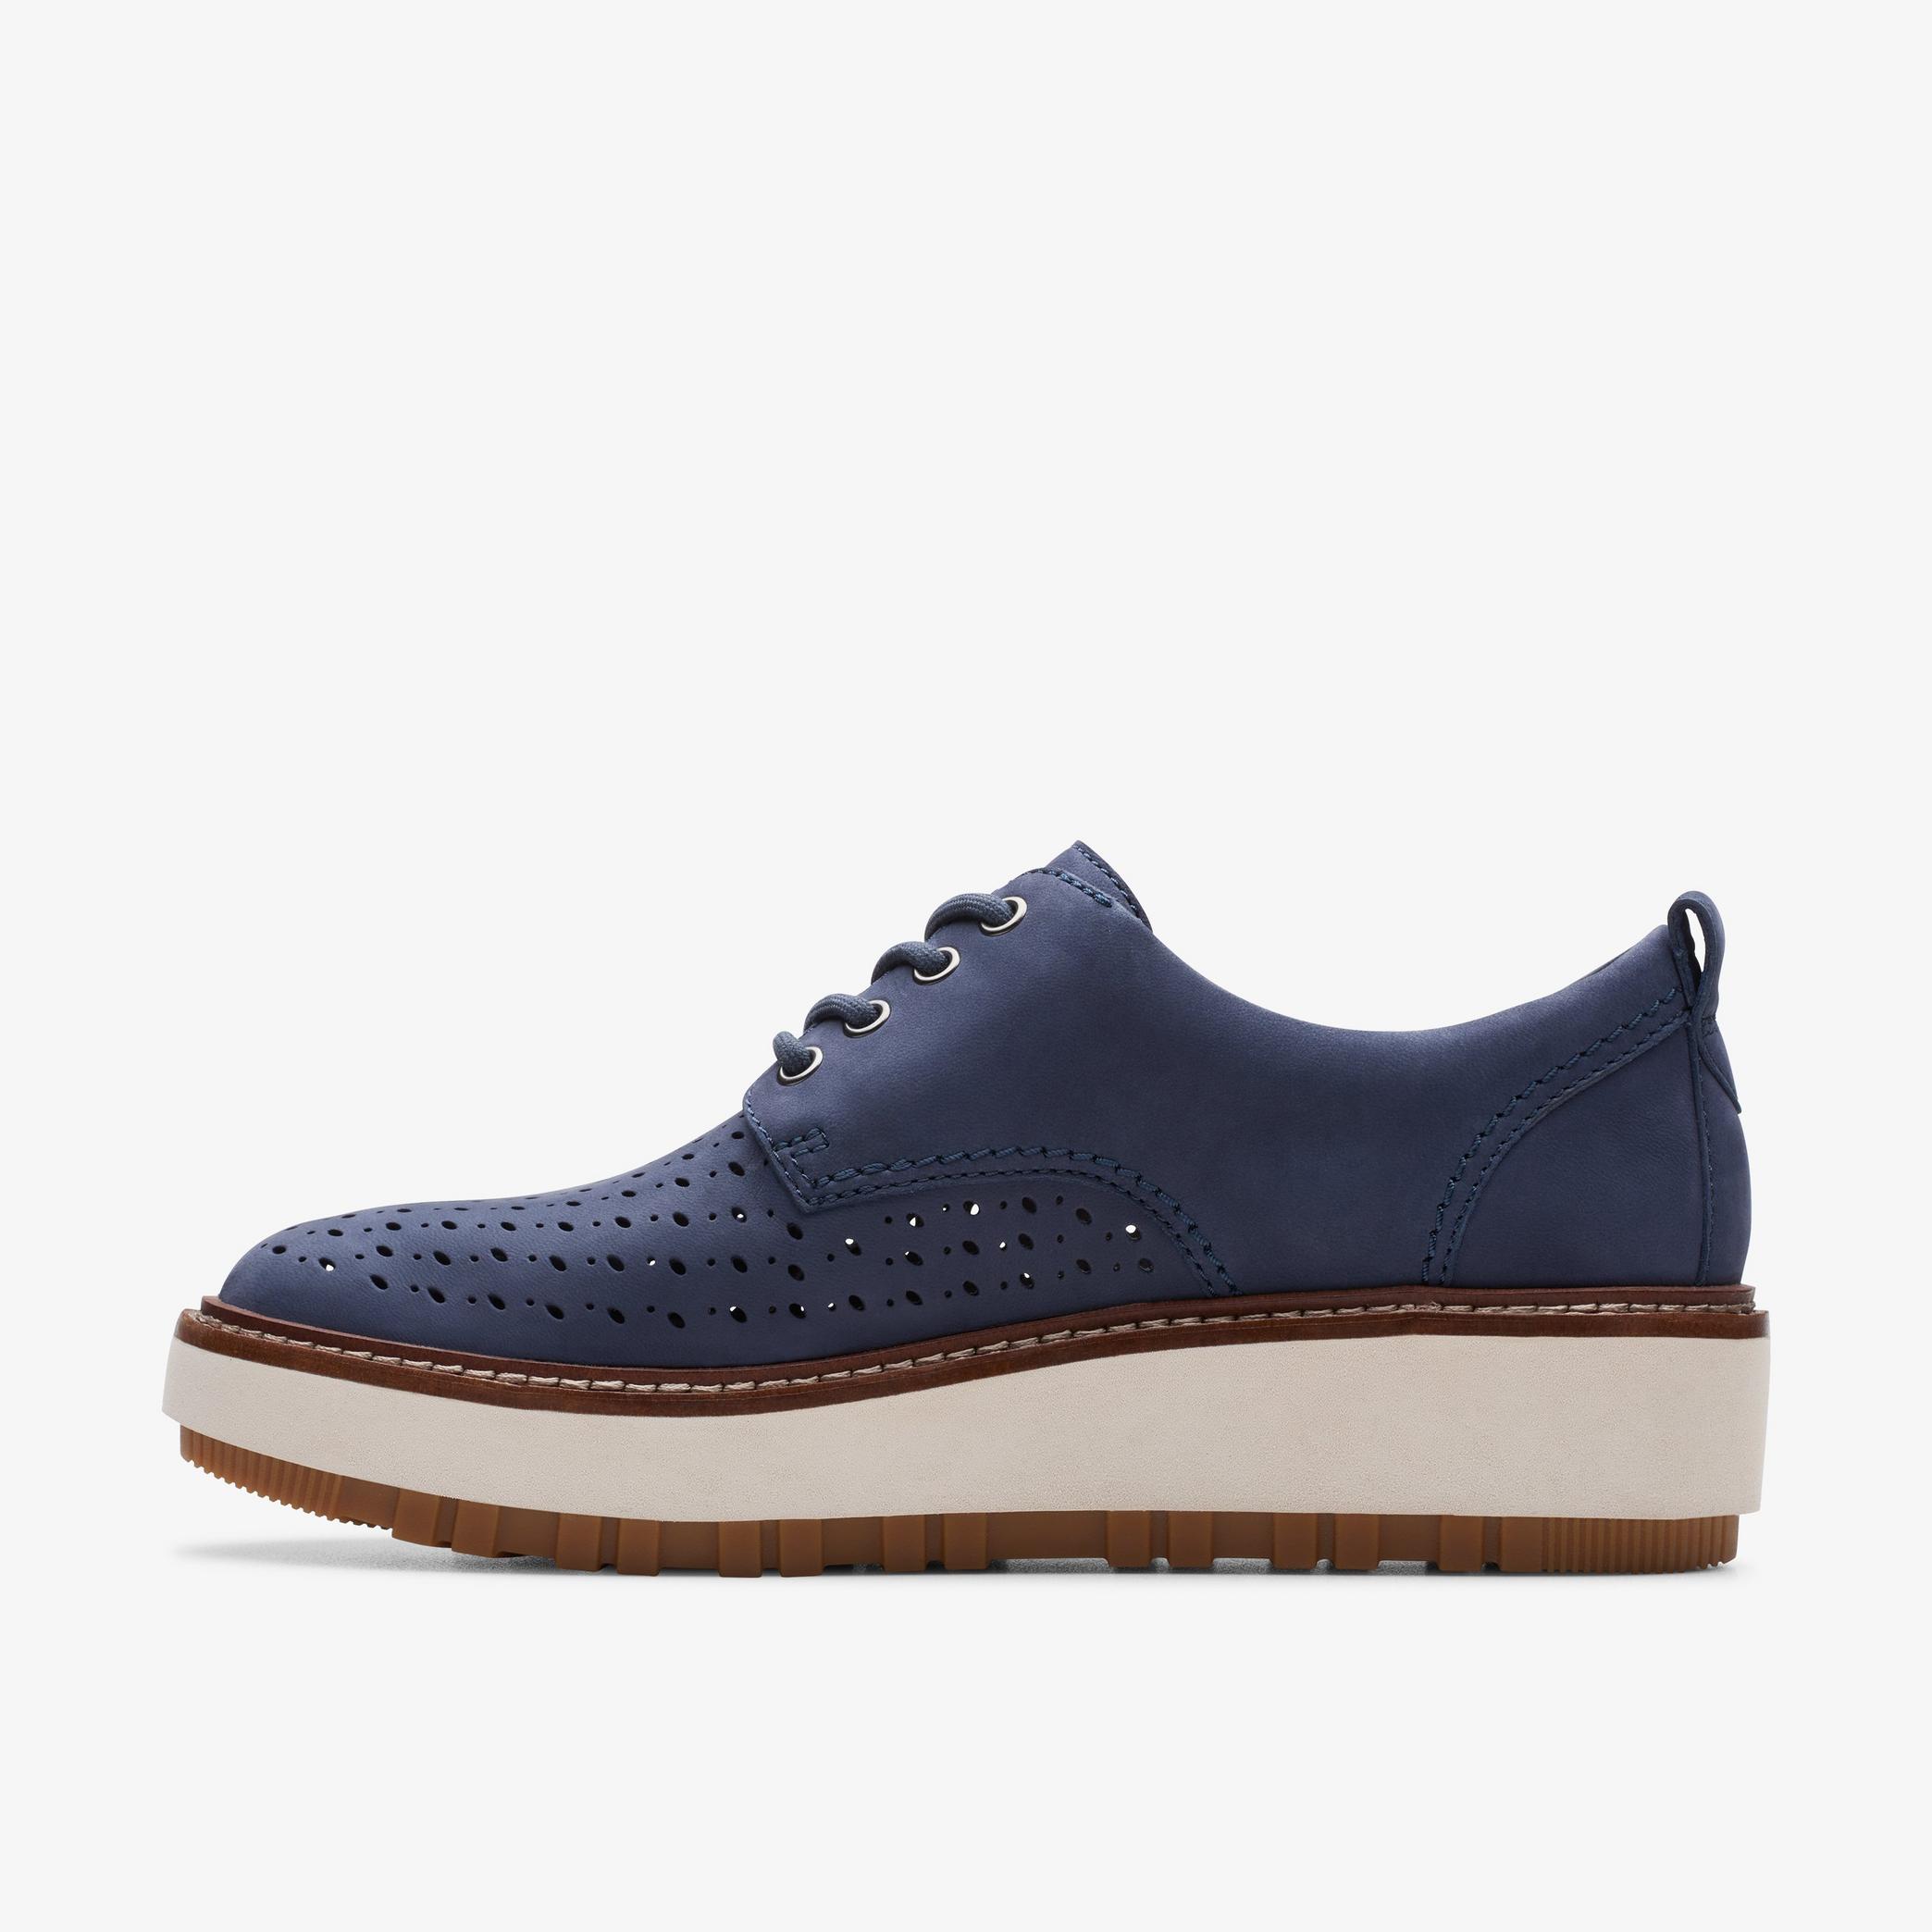 Orianna Move Navy Nubuck Loafers, view 2 of 6